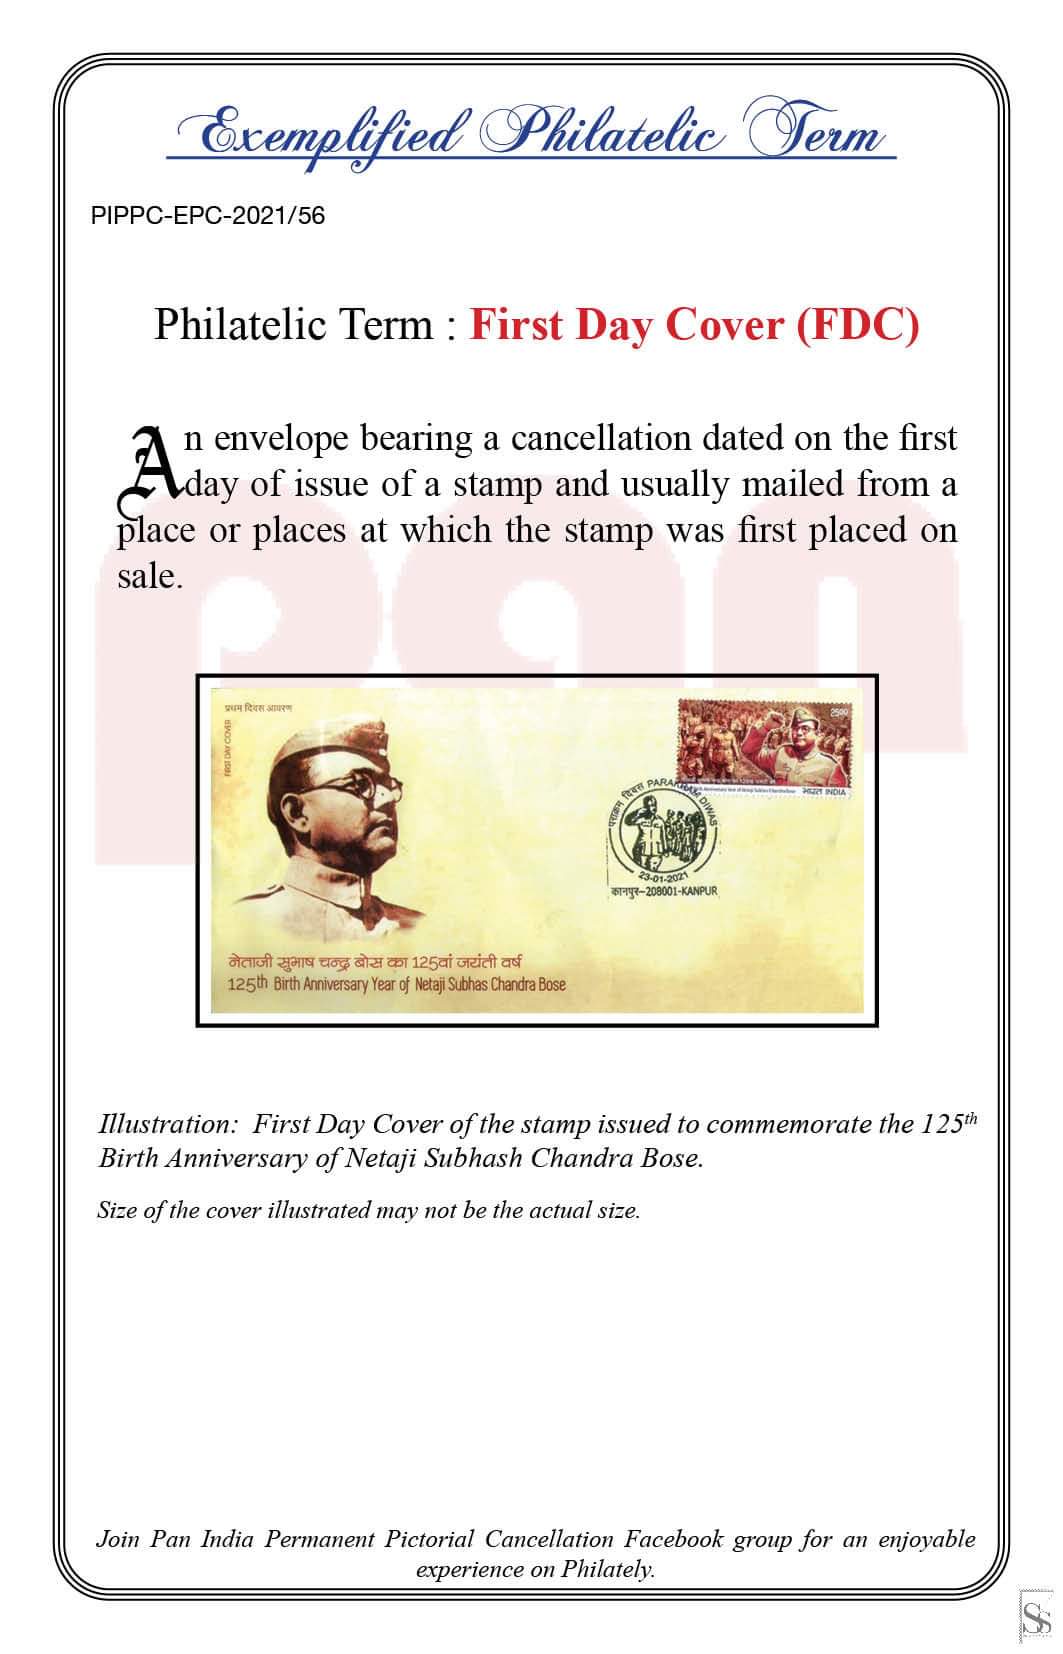 56. Today's Exemplified Philatelic term- First Day Cover